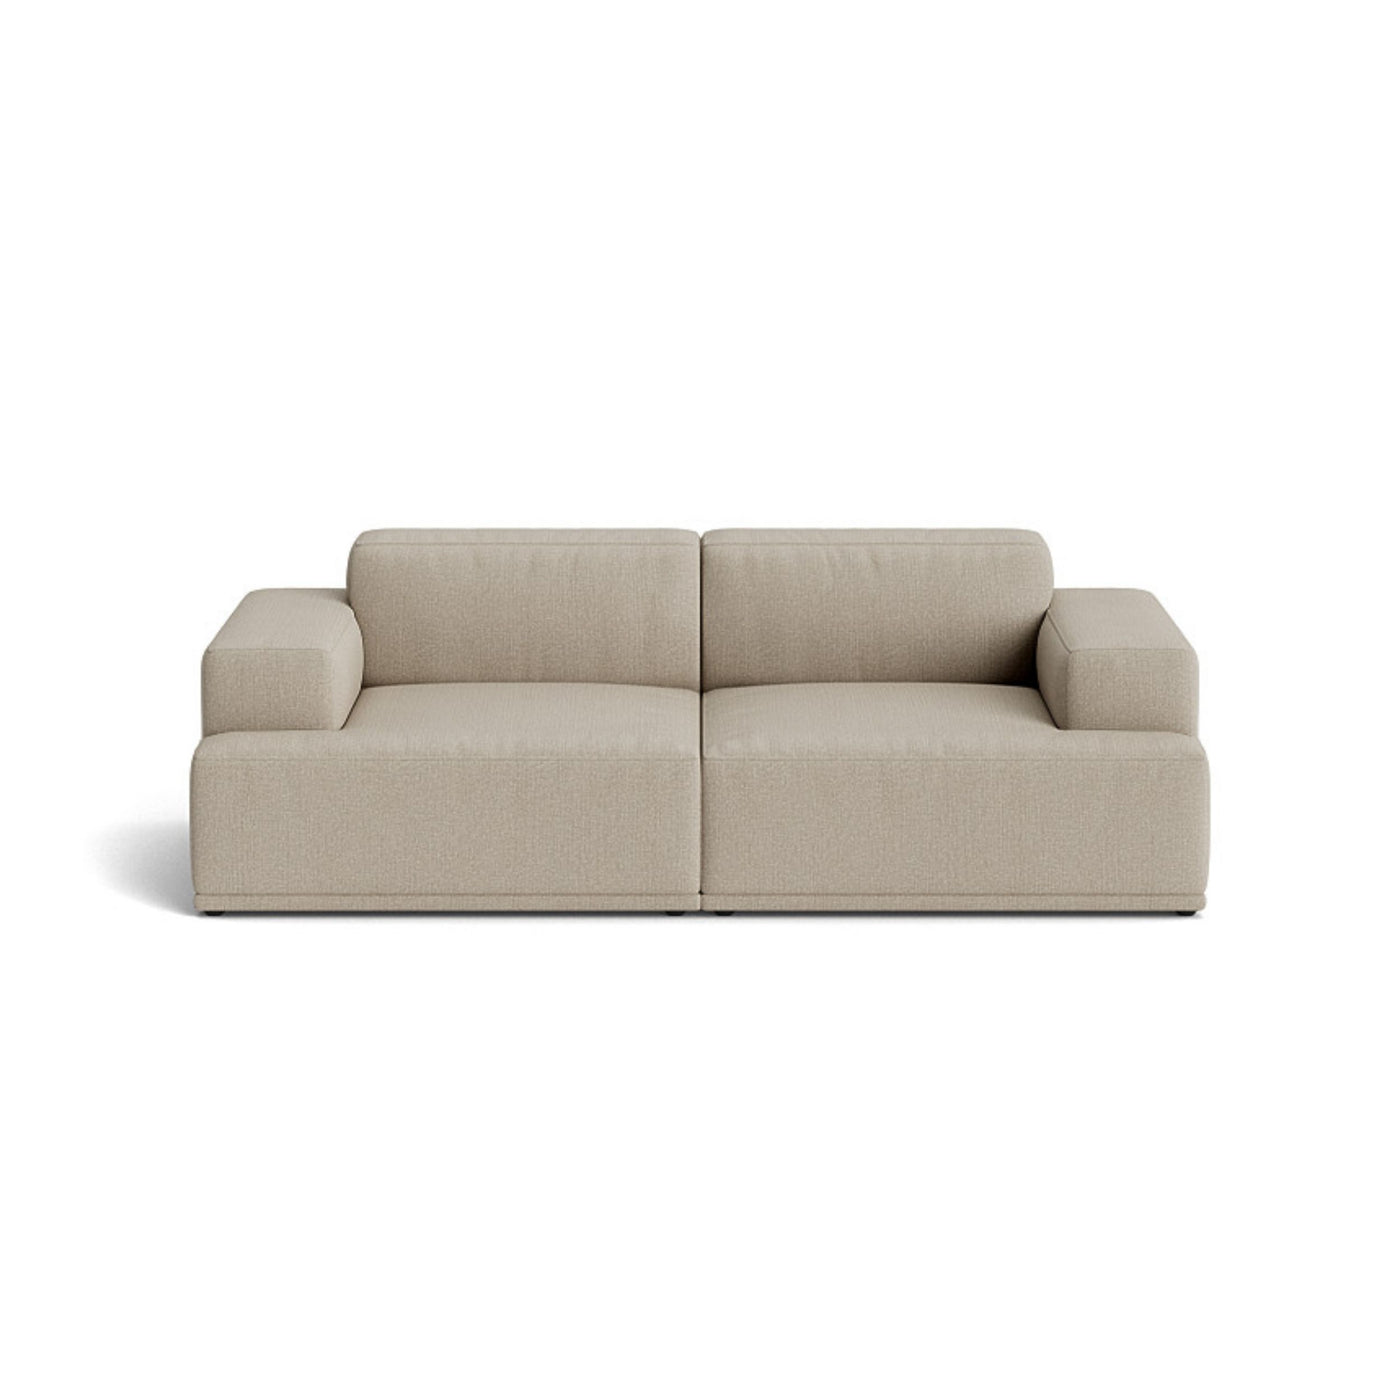 Muuto Connect Soft Modular 2 Seater Sofa, configuration 1. made-to-order from someday designs. #colour_clay-10